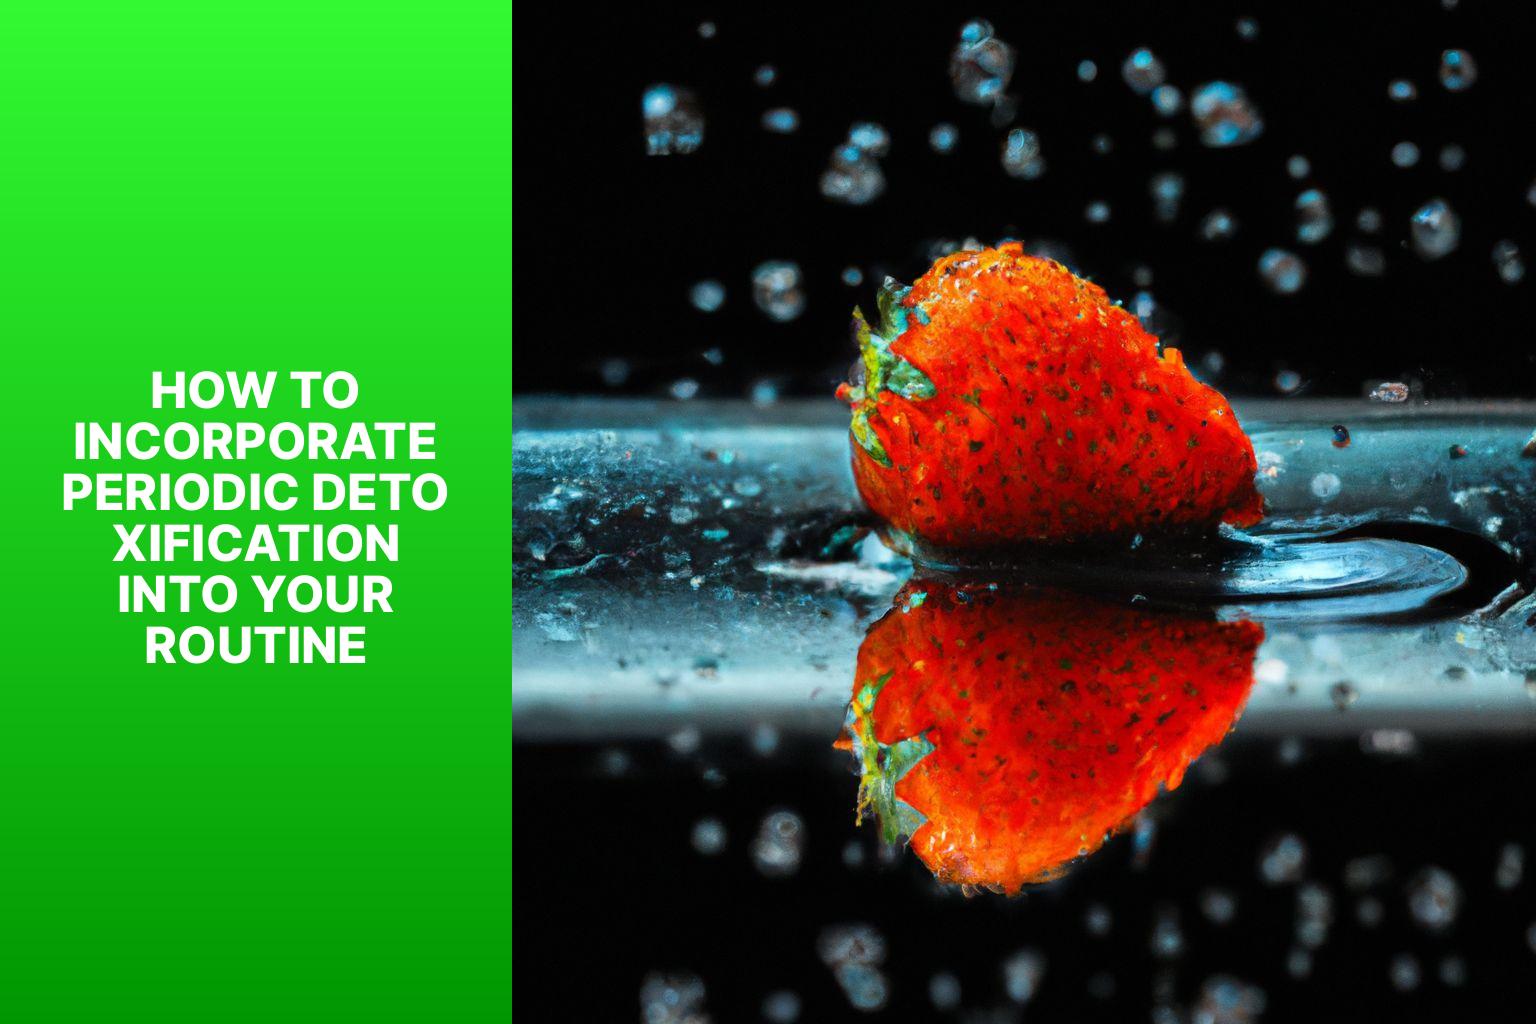 How to Incorporate Periodic Detoxification into Your Routine - The role of periodic detoxification in maintaining overall health 